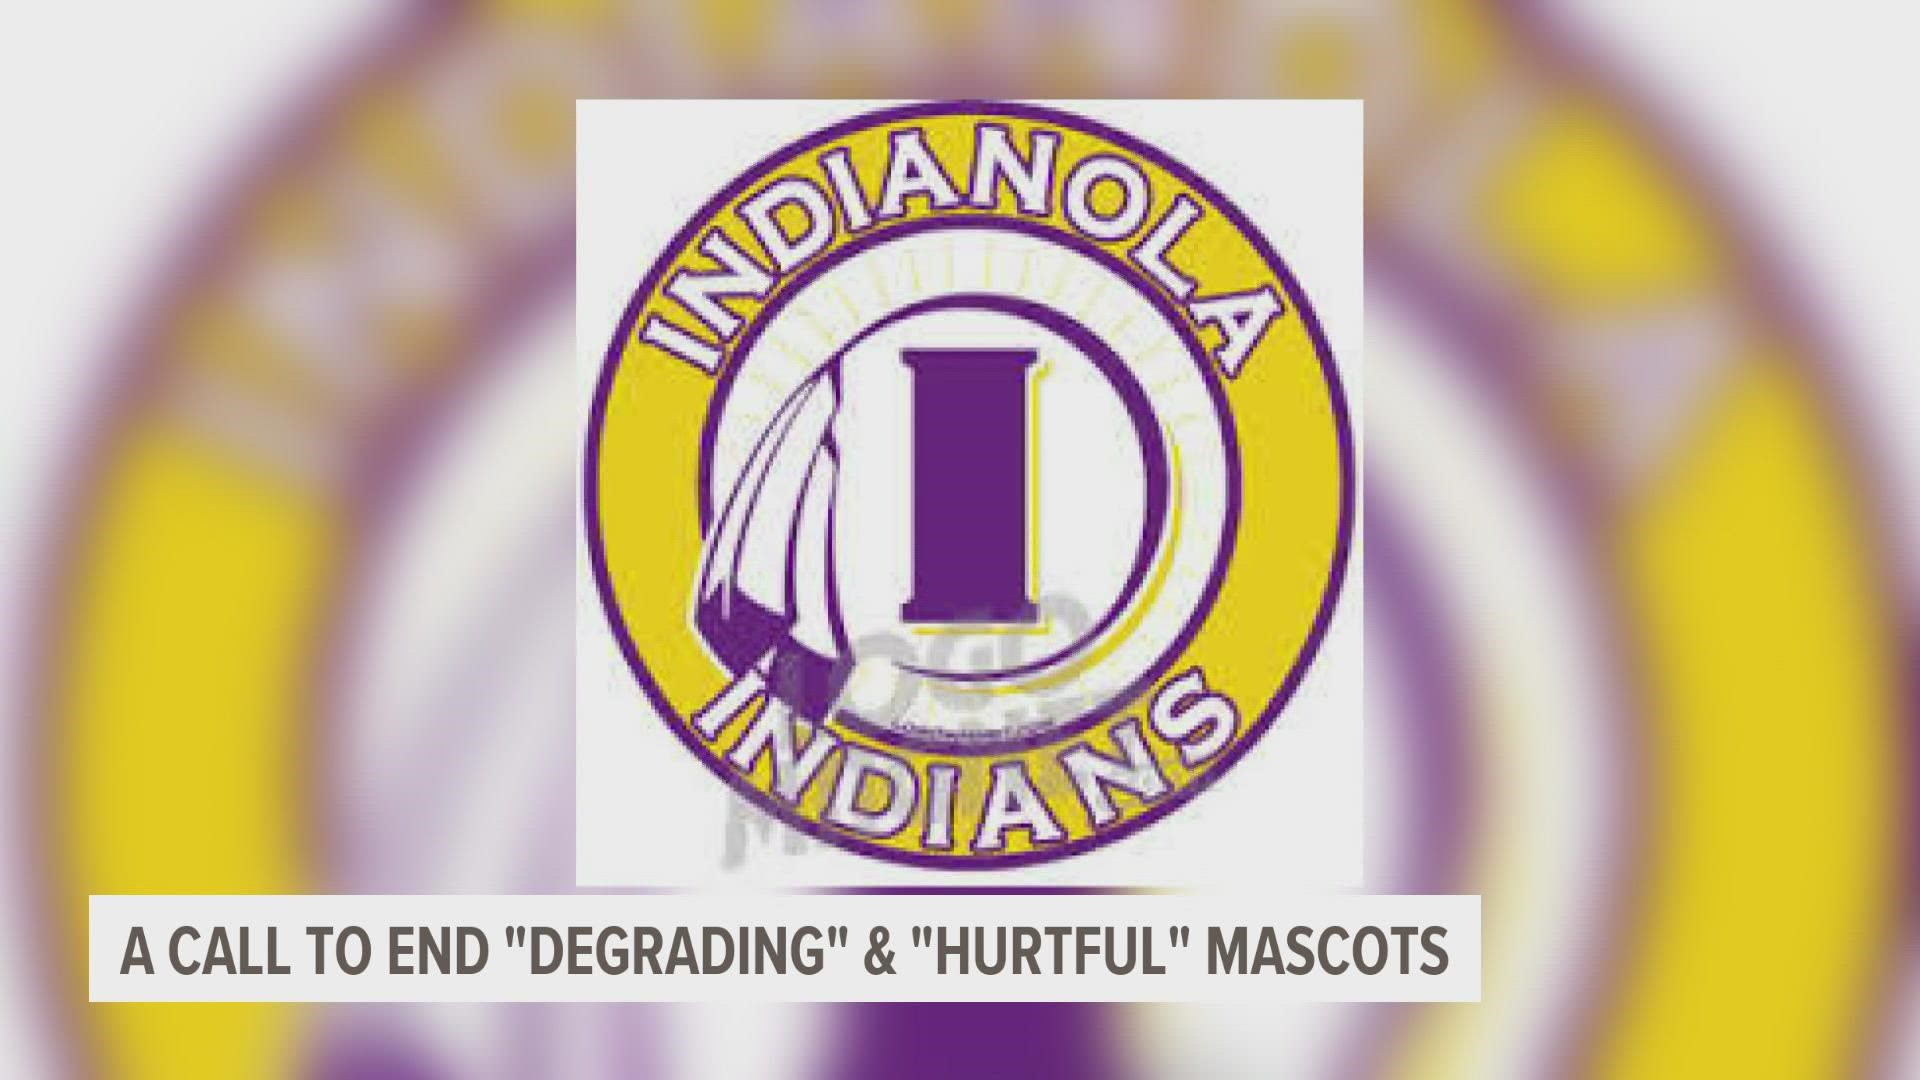 The Iowa Department of Human Rights is calling for no more Native American symbols for Iowa schools' mascots.